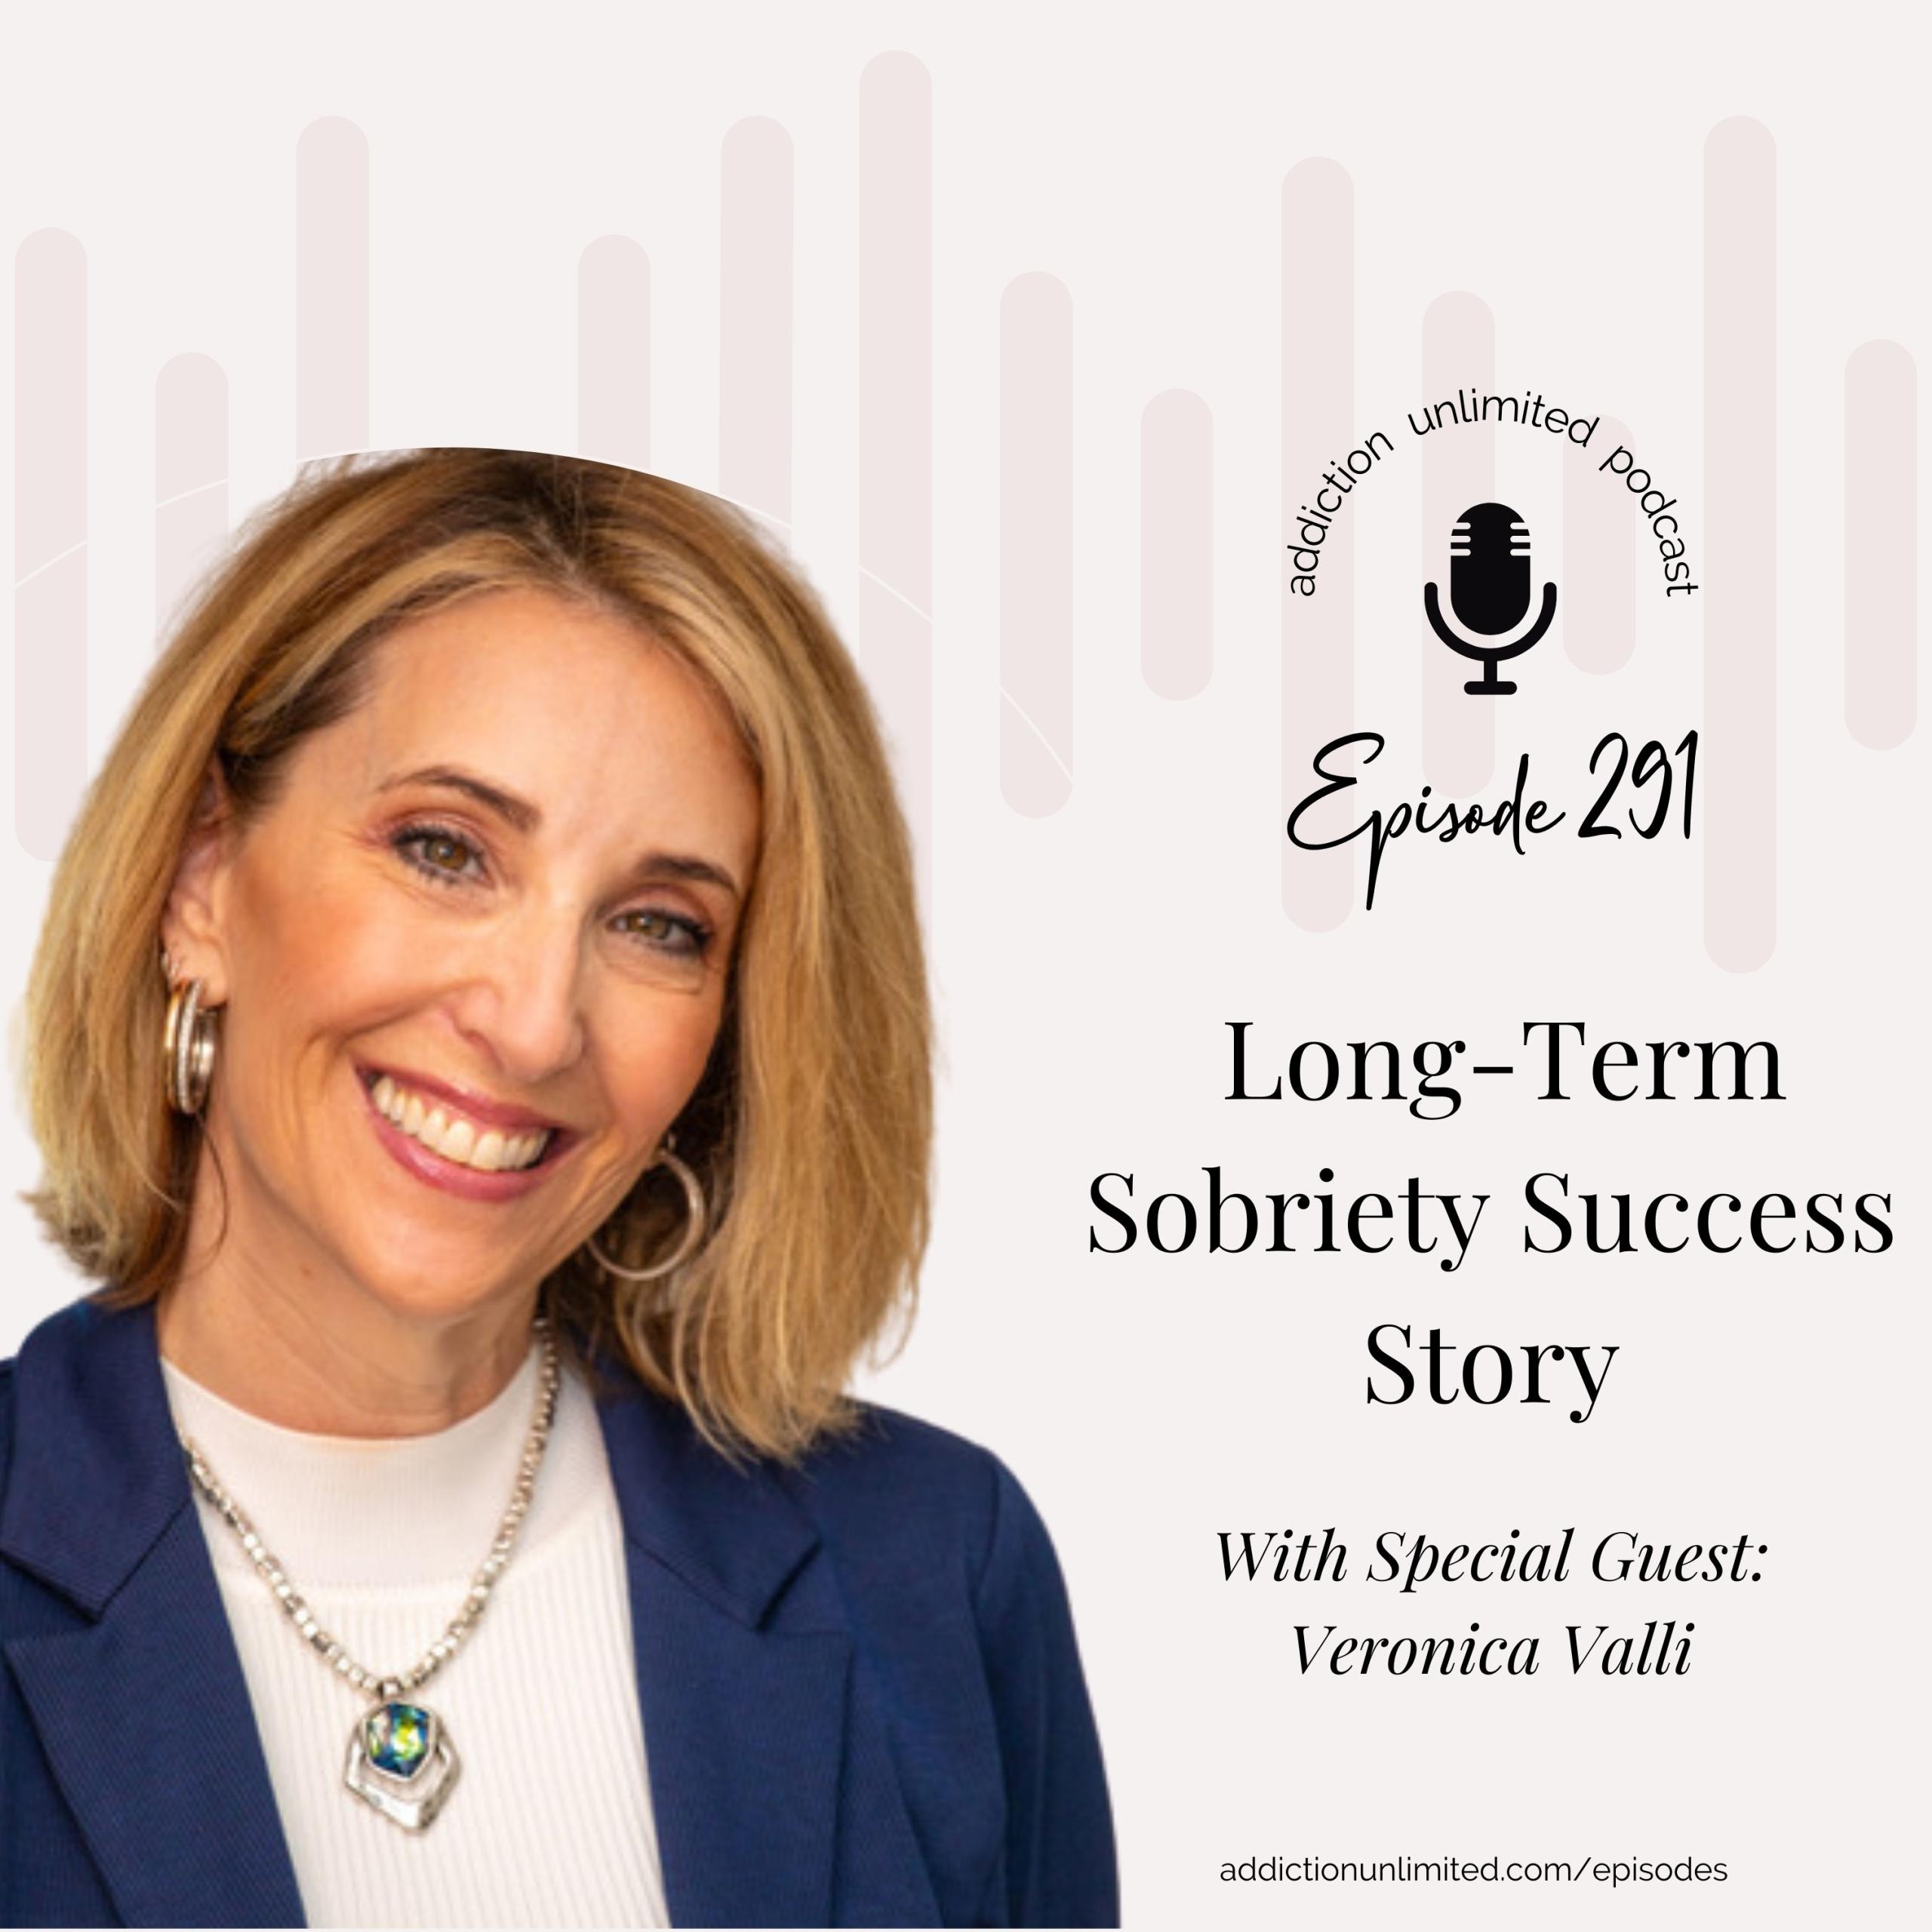 Long-Term Sobriety Success Story